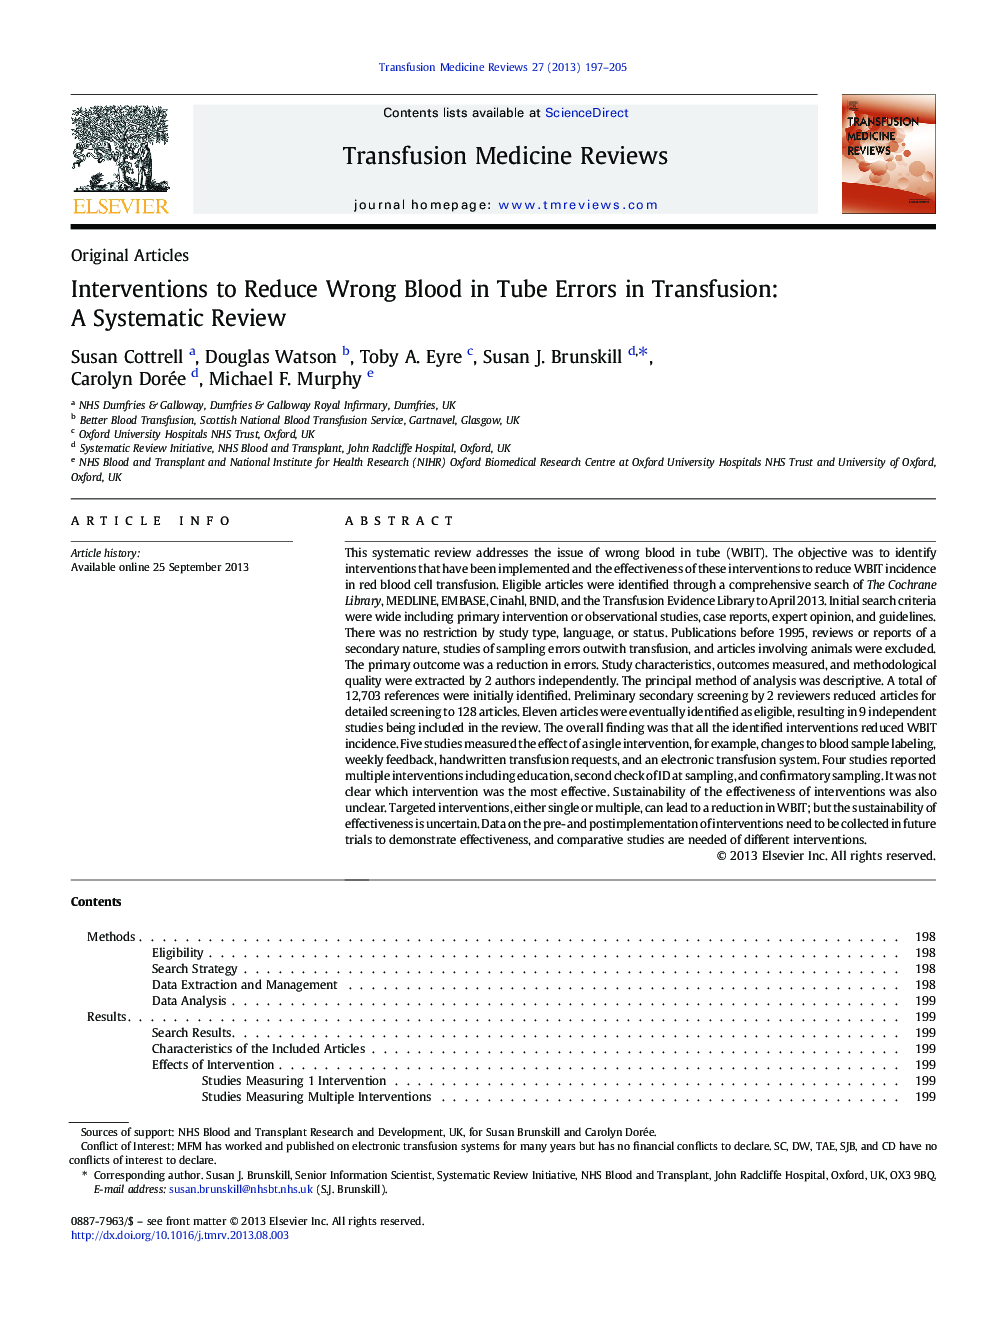 Interventions to Reduce Wrong Blood in Tube Errors in Transfusion: A Systematic Review 